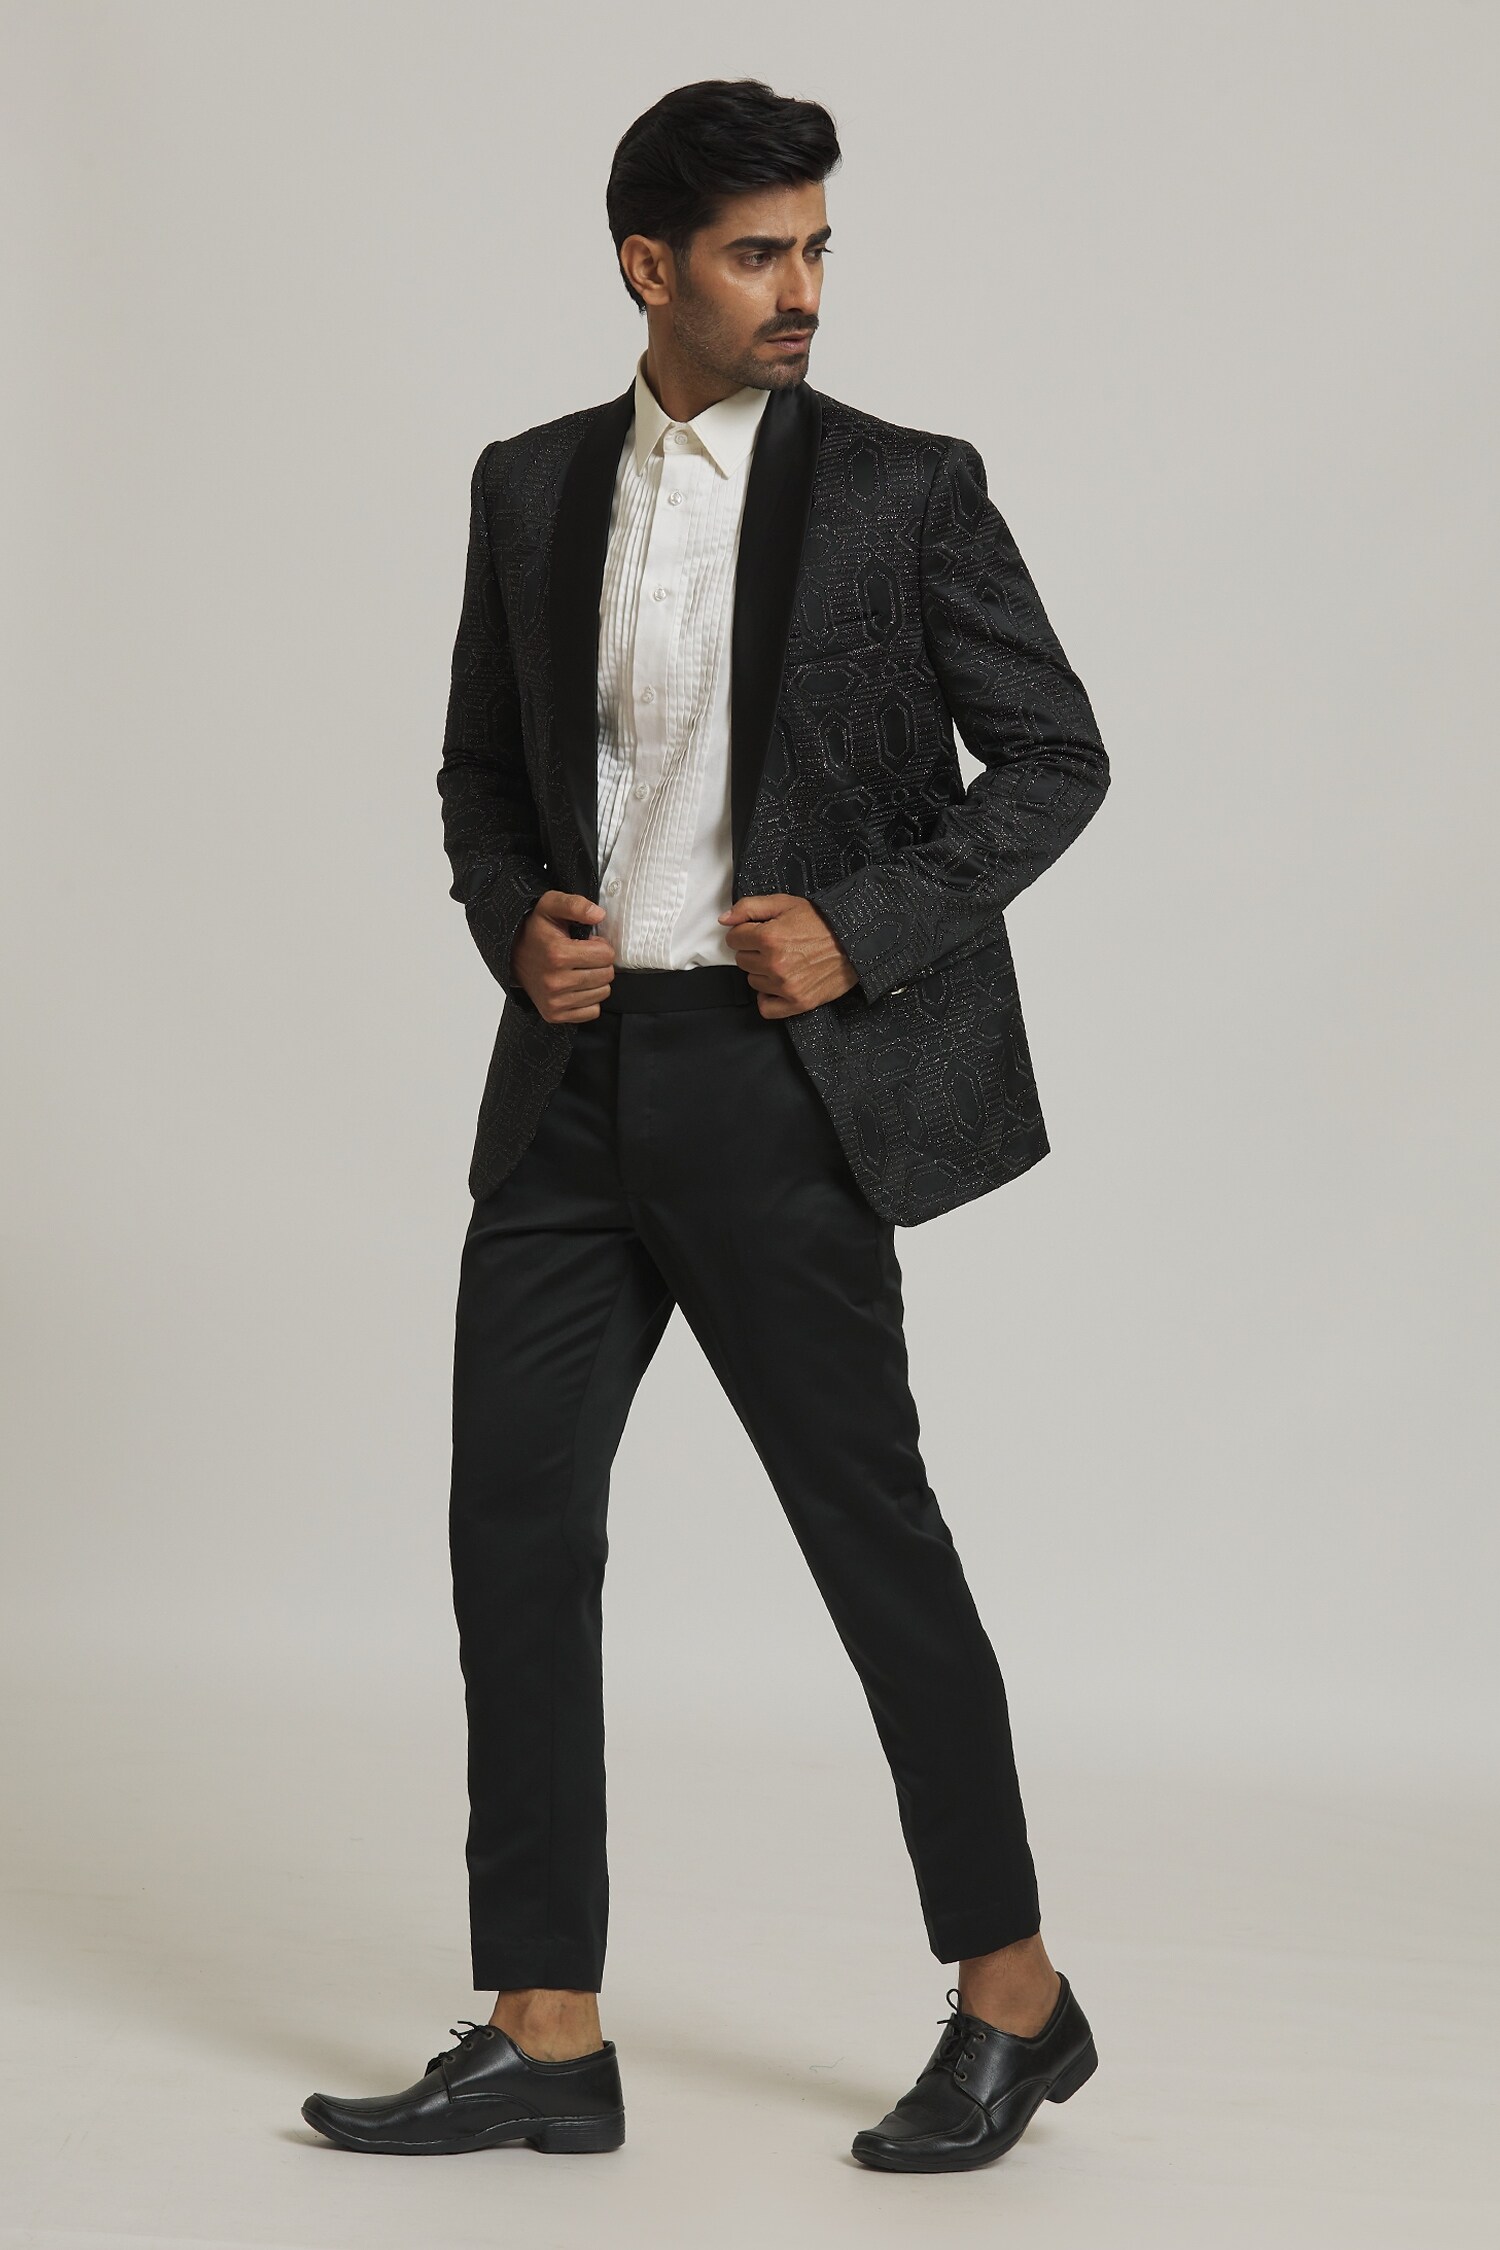 Buy White Linen Plain Blazer And Trouser Set For Men by Nero by Shaifali  and Satya Online at Aza Fashions.